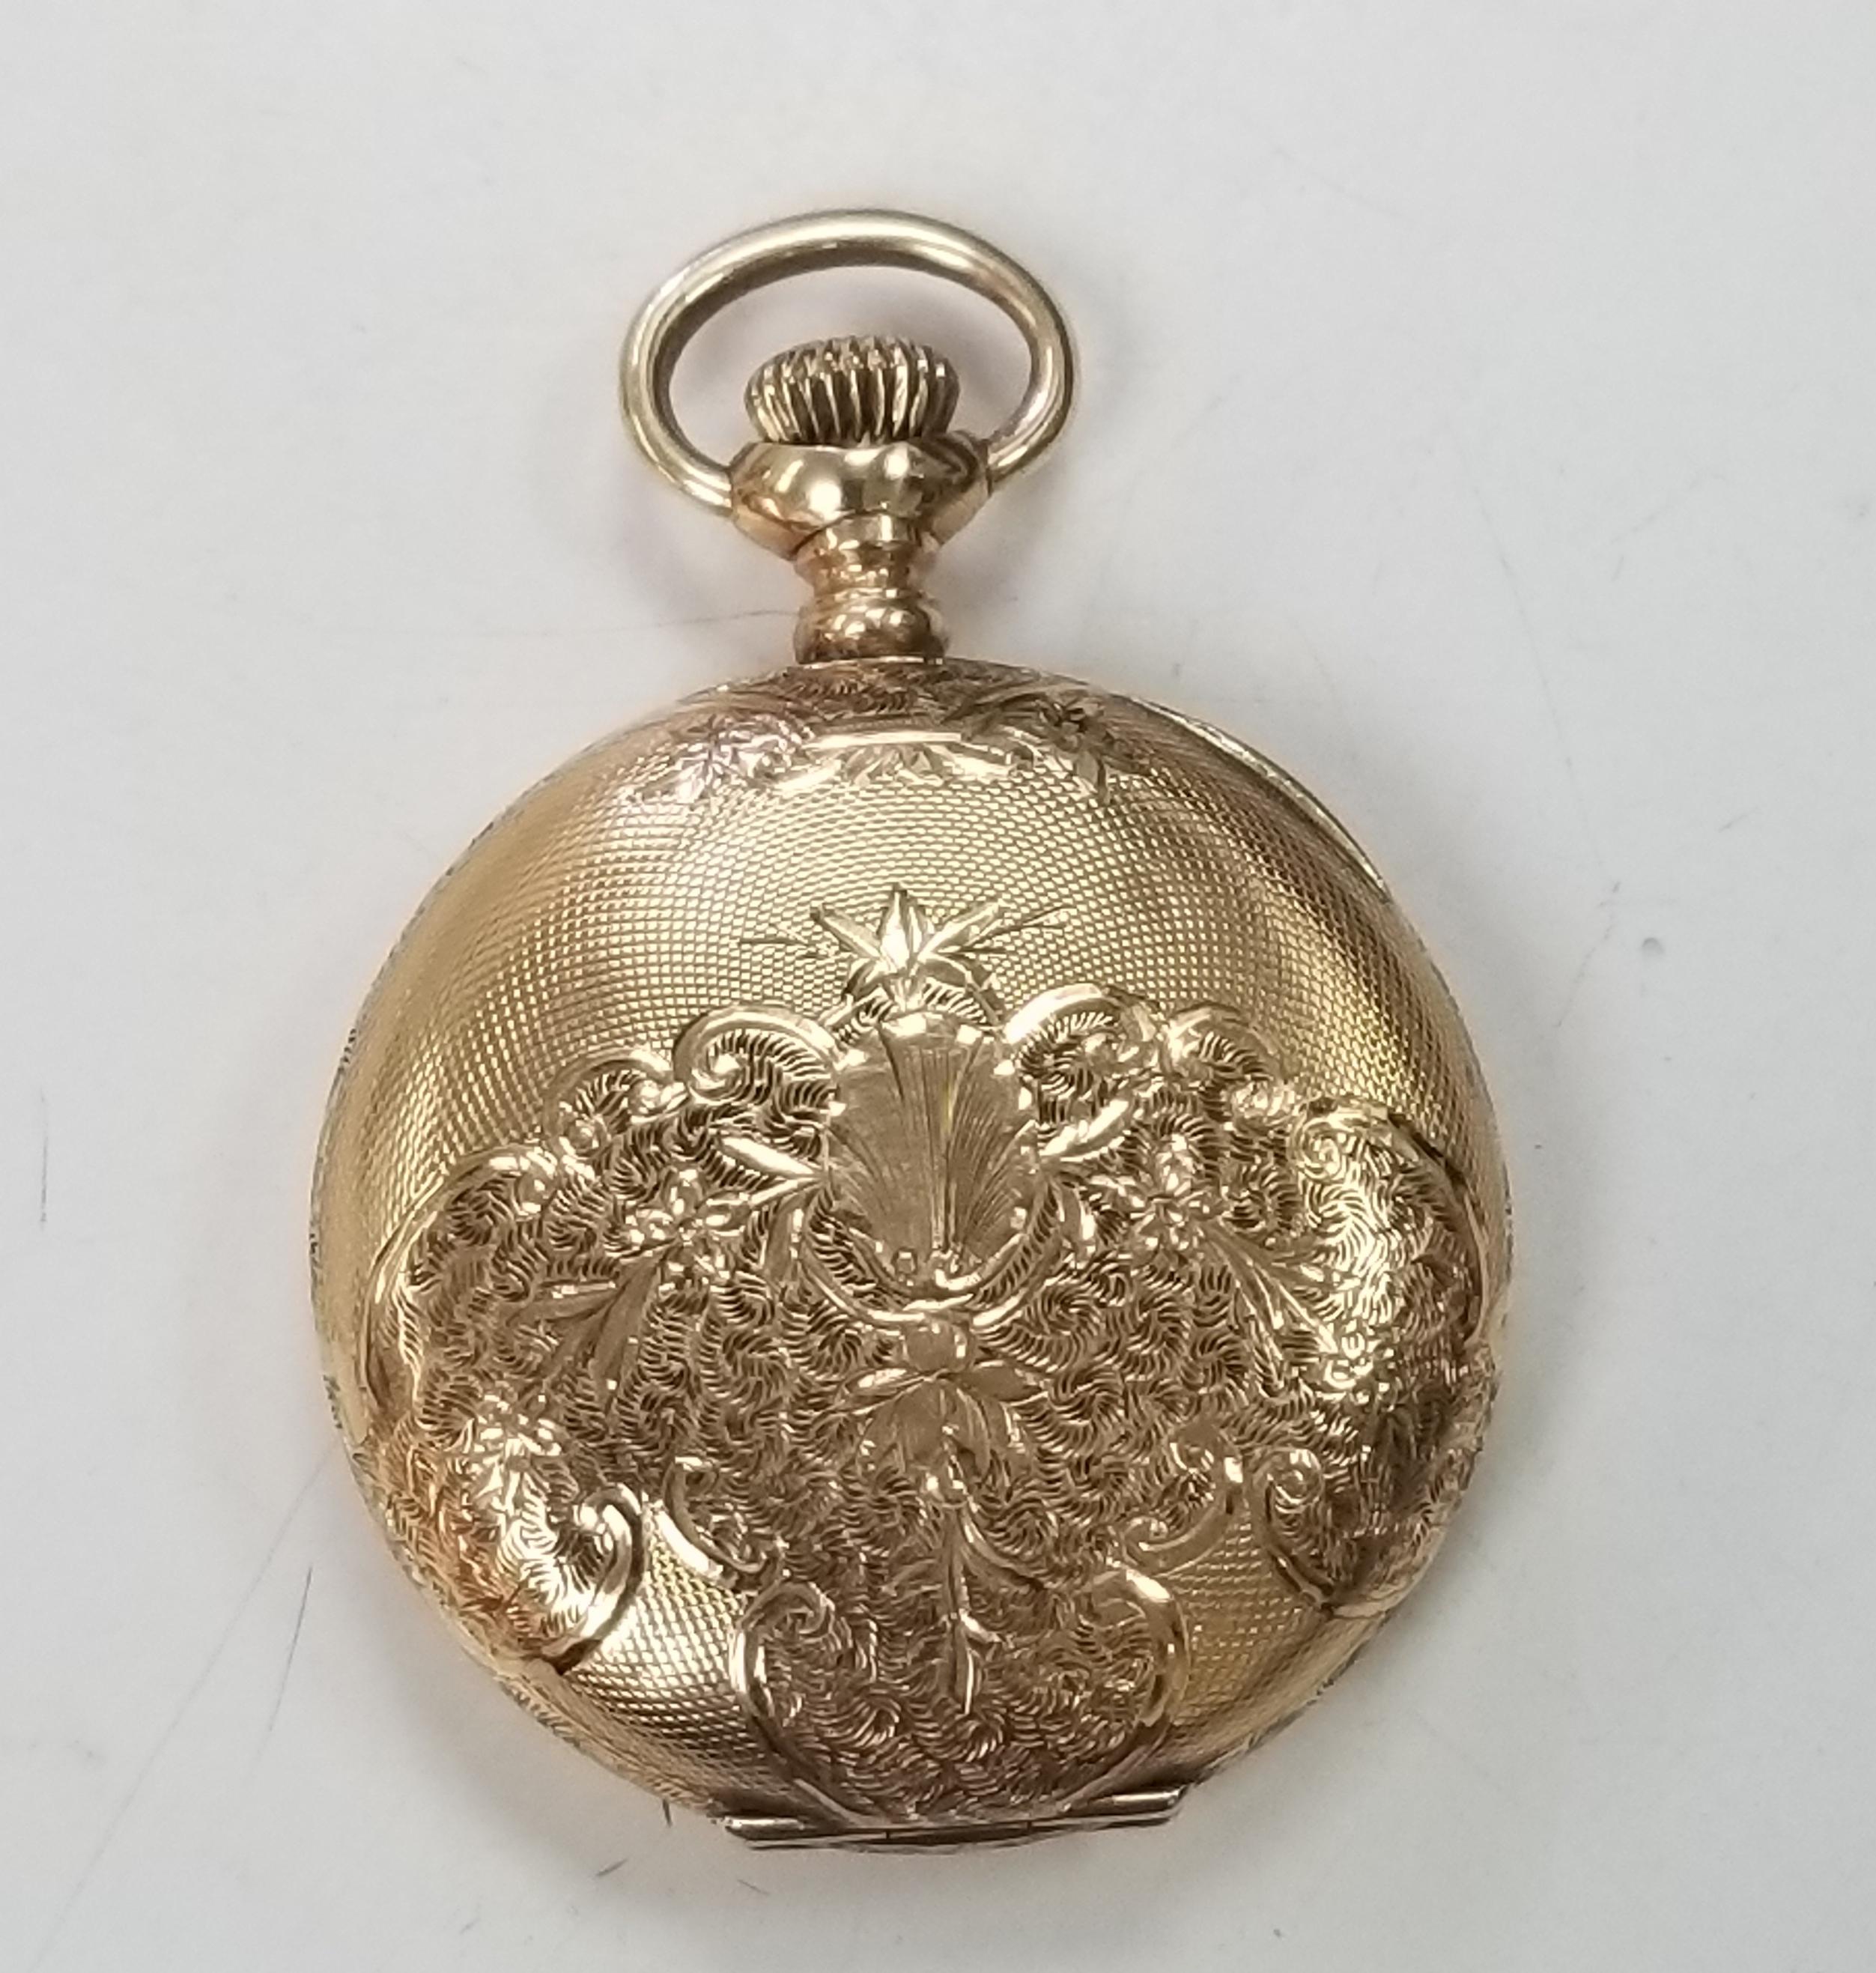 Absolutely beautiful pocket watch.  Made by American Watch Co. WALTHAM 1900s.  Heavy gauge 14K yellow gold.  In pristine crisp condition.  Hand engrave both front and back. Hunting case. 17 jewels.  Manual wind.  White enamel dial with black enamel